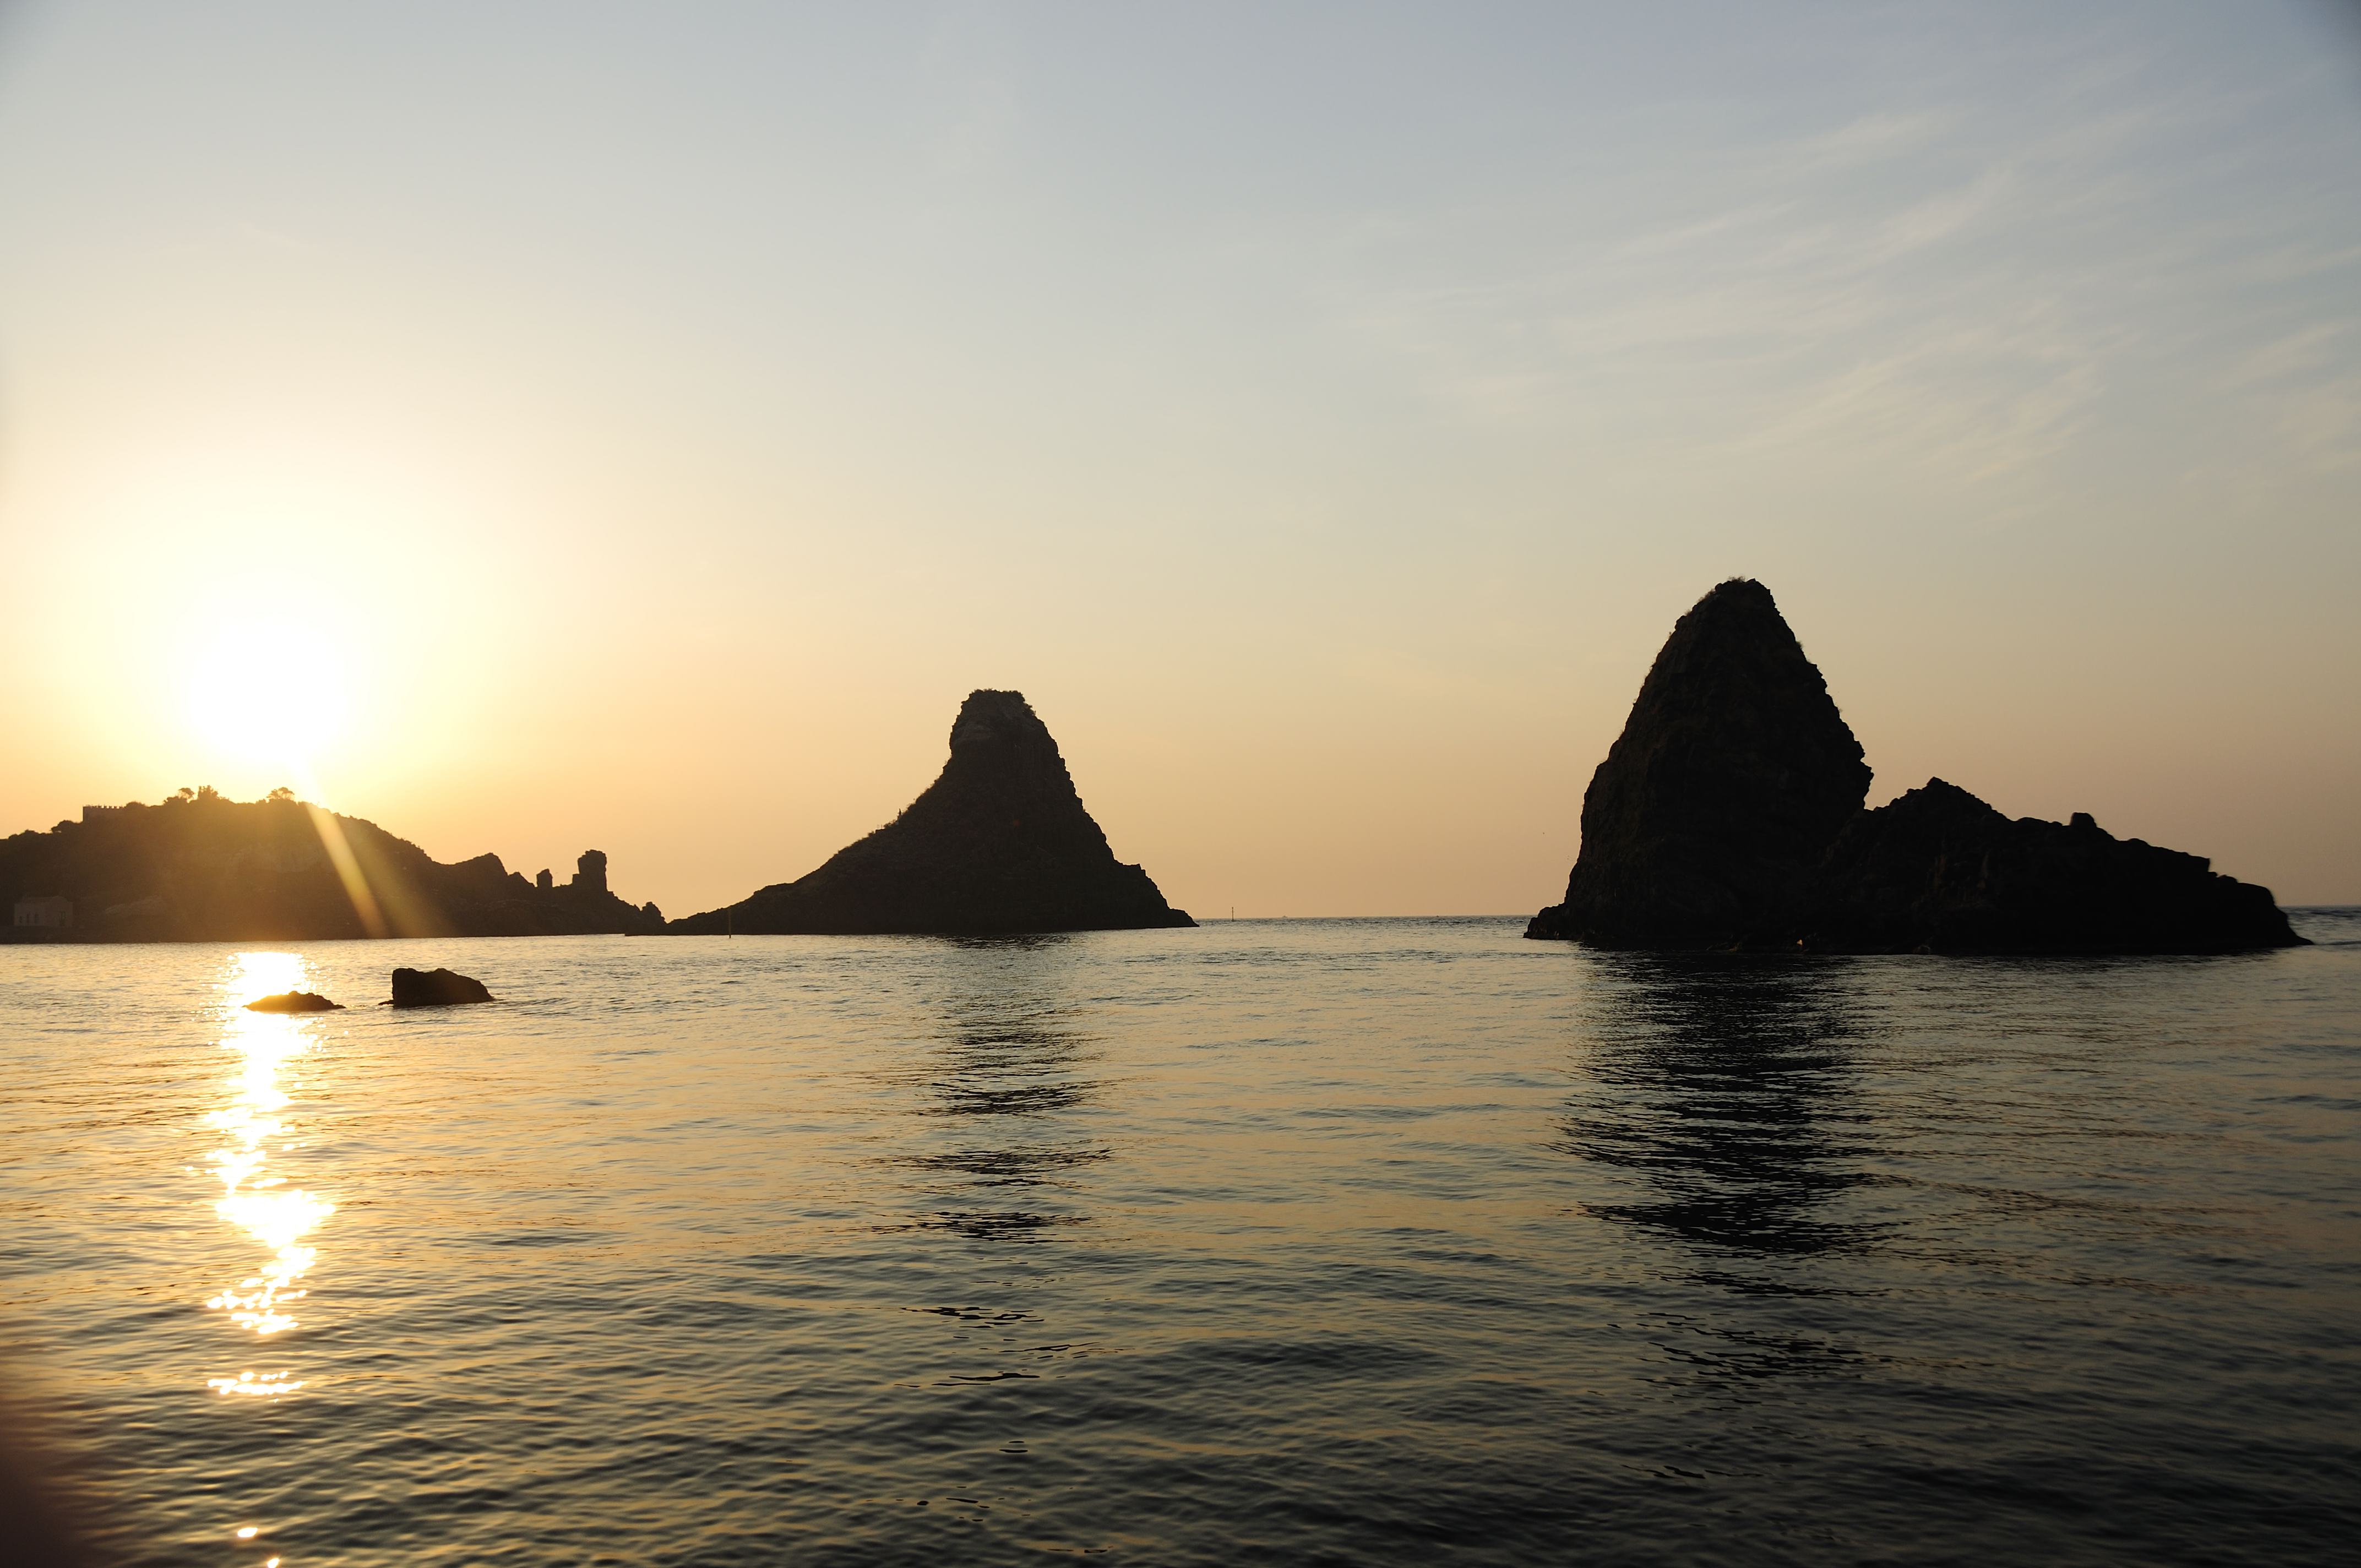 Islands of the cyclops at dawn sicily italy - creative commons by gnuckx photo